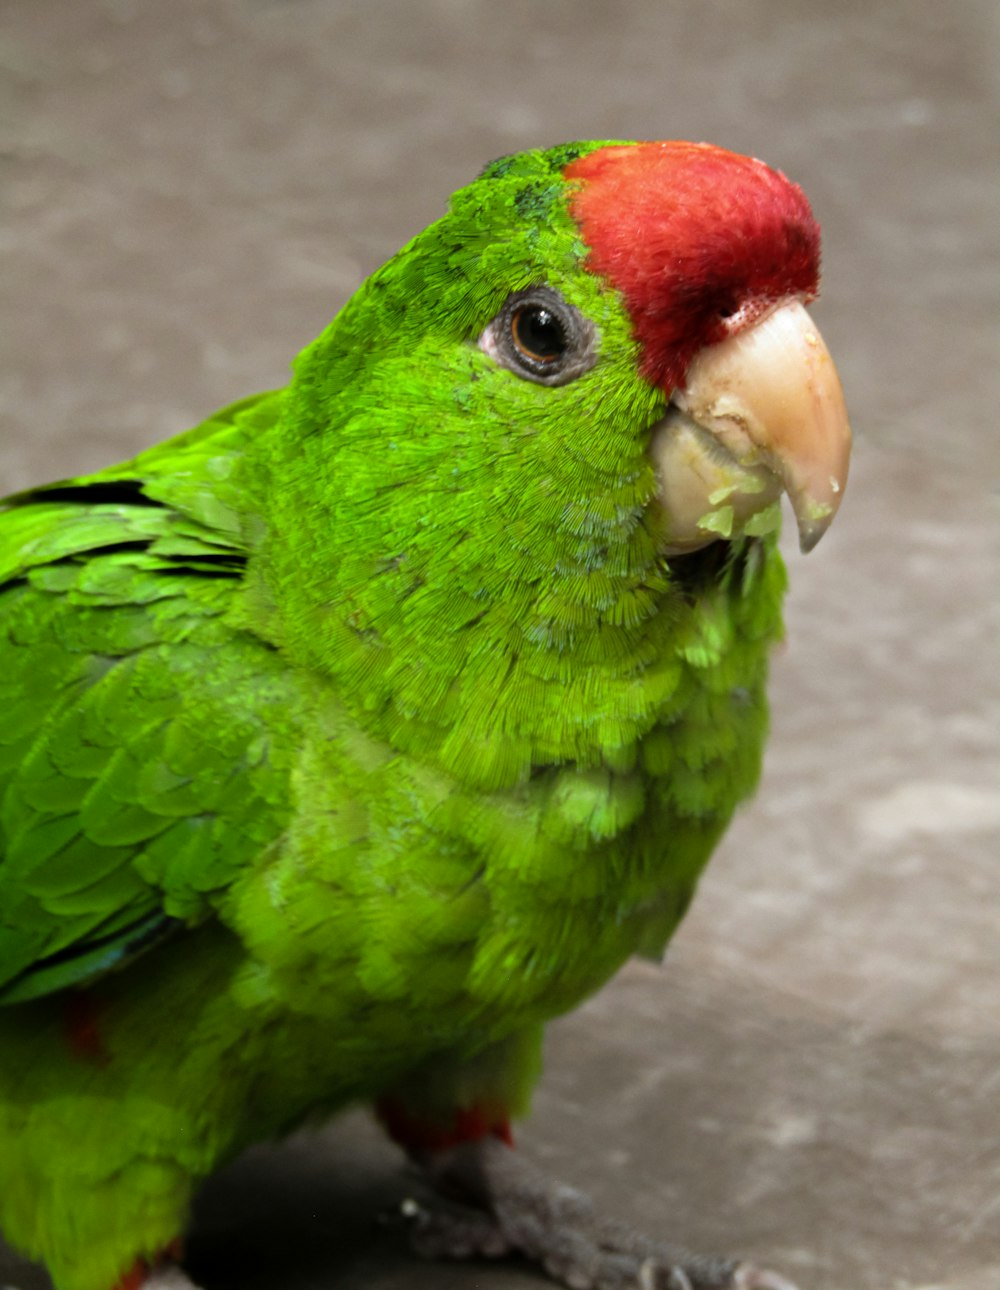 a green parrot with a red head sitting on the ground